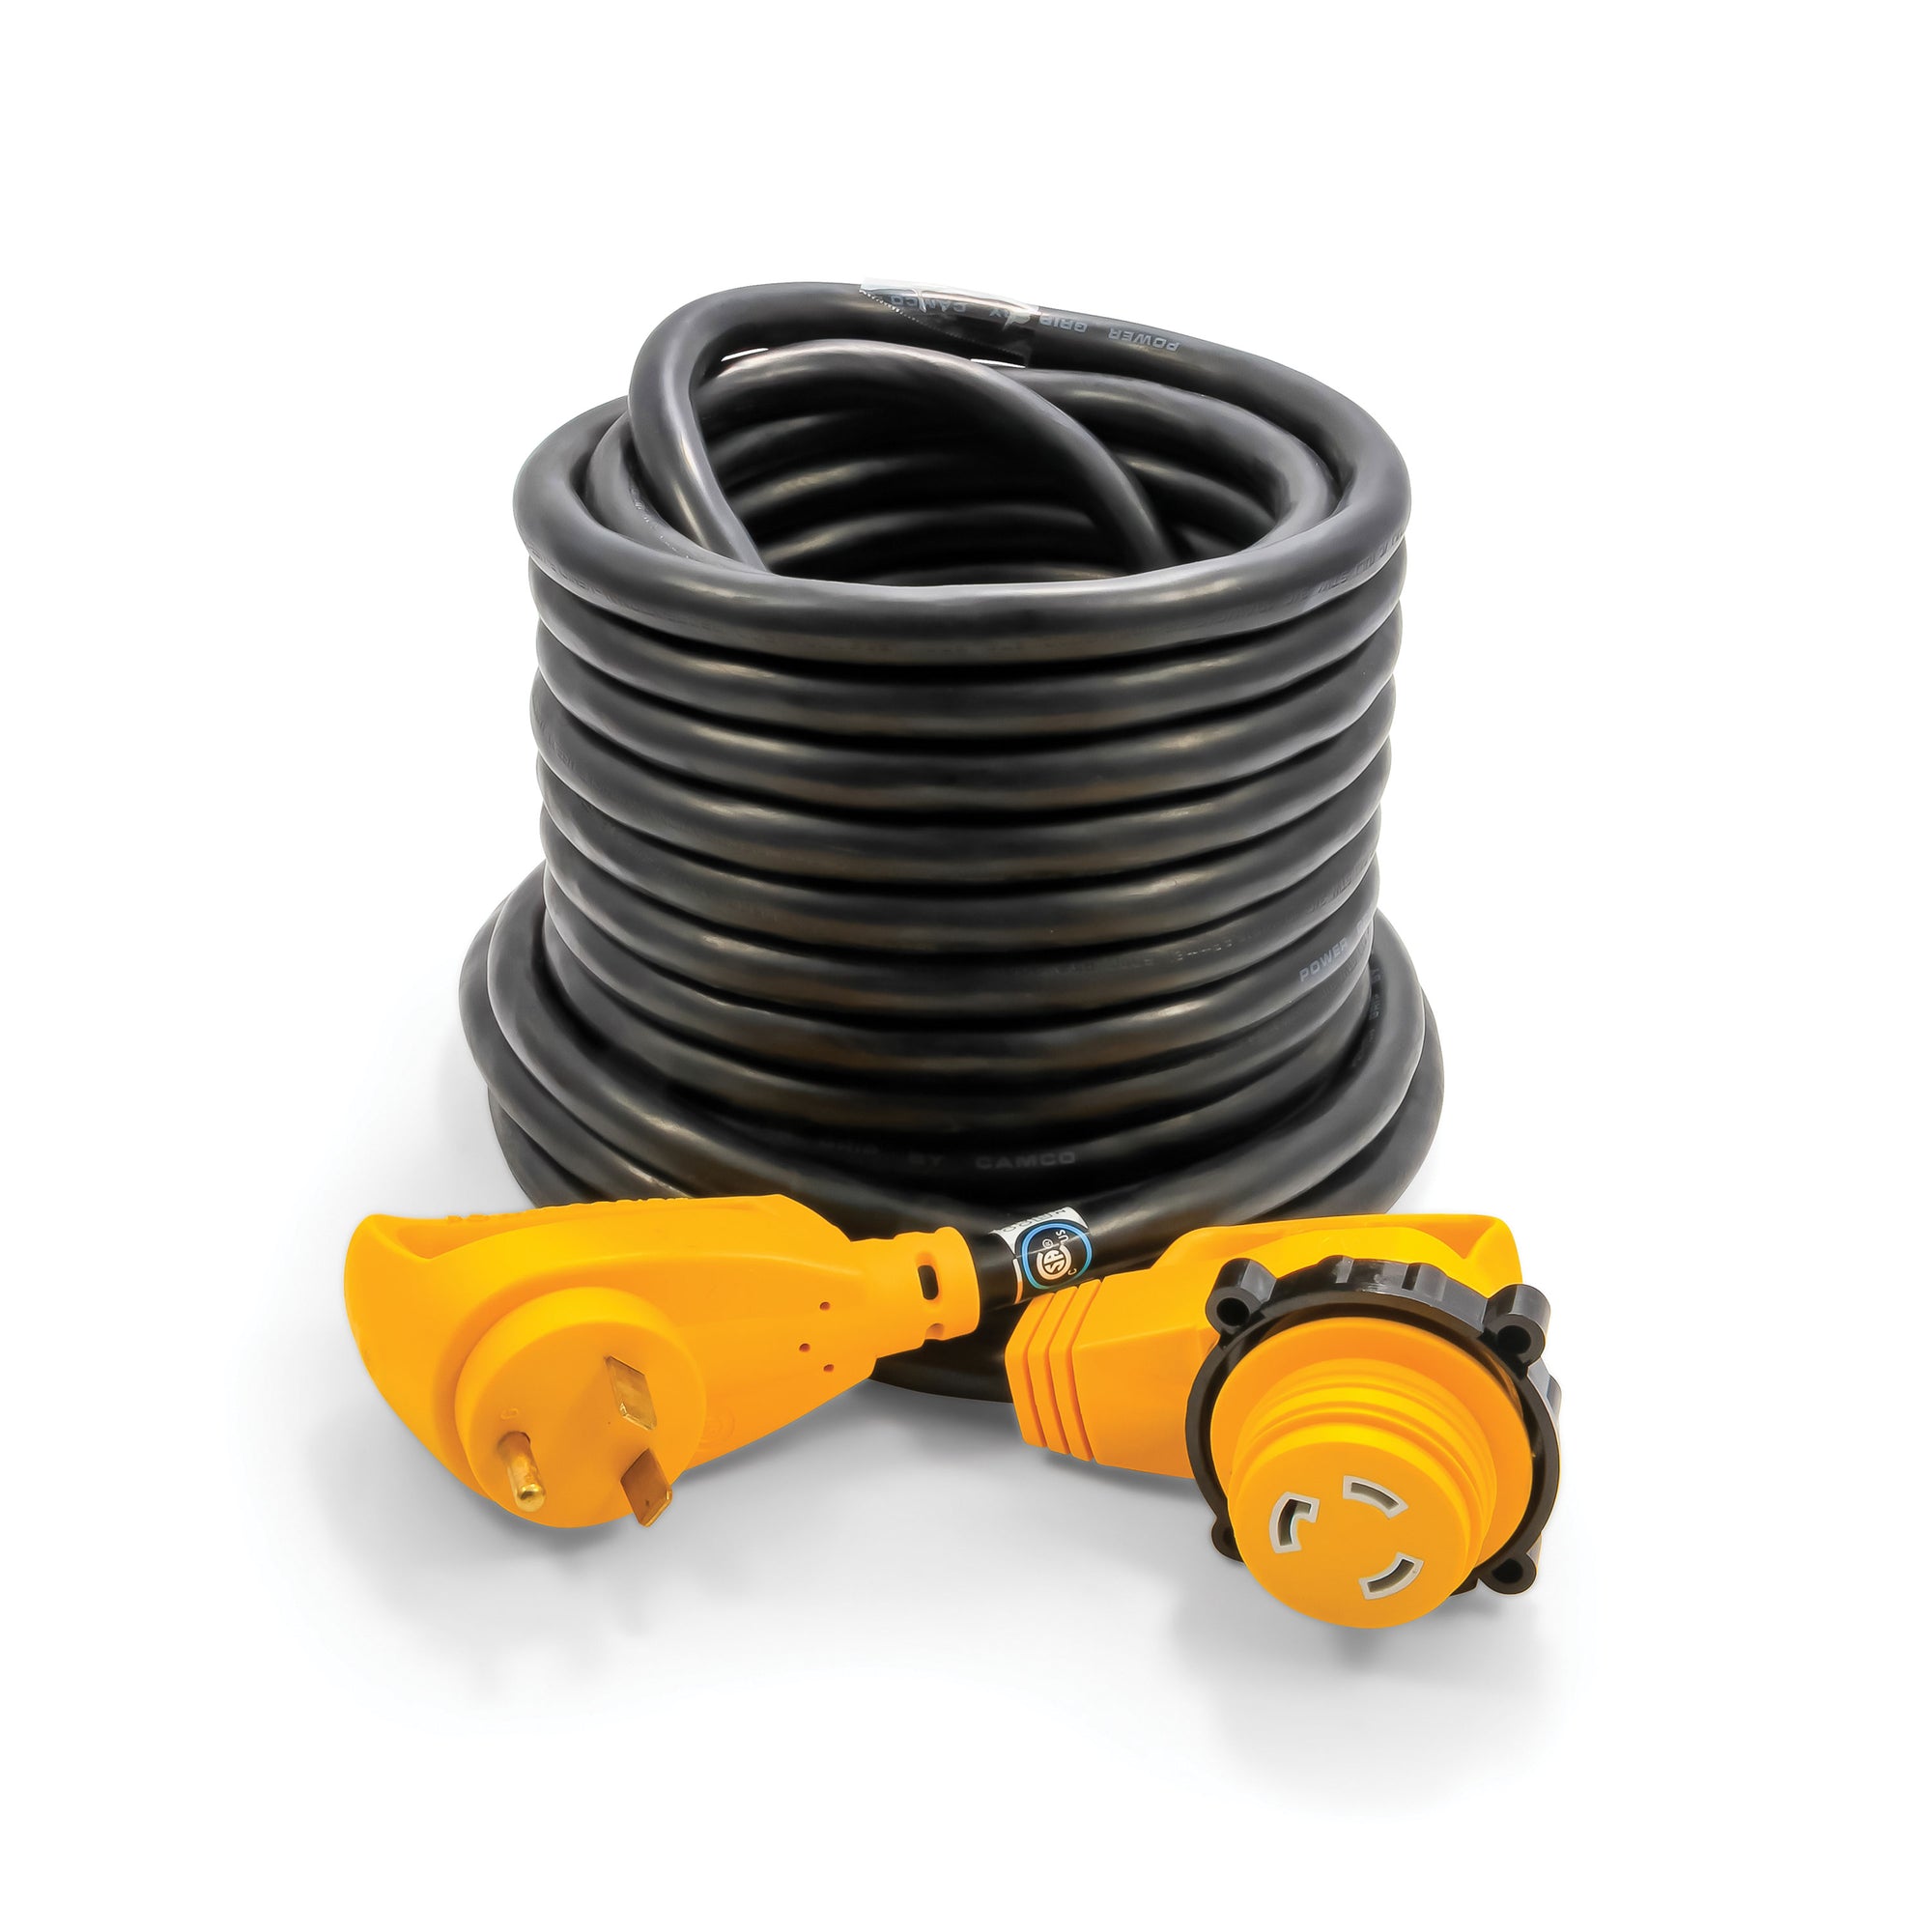 Camco 55525 30 Amp Power Grip Extension Cord with 90M/90F Locking Adapter - 50'